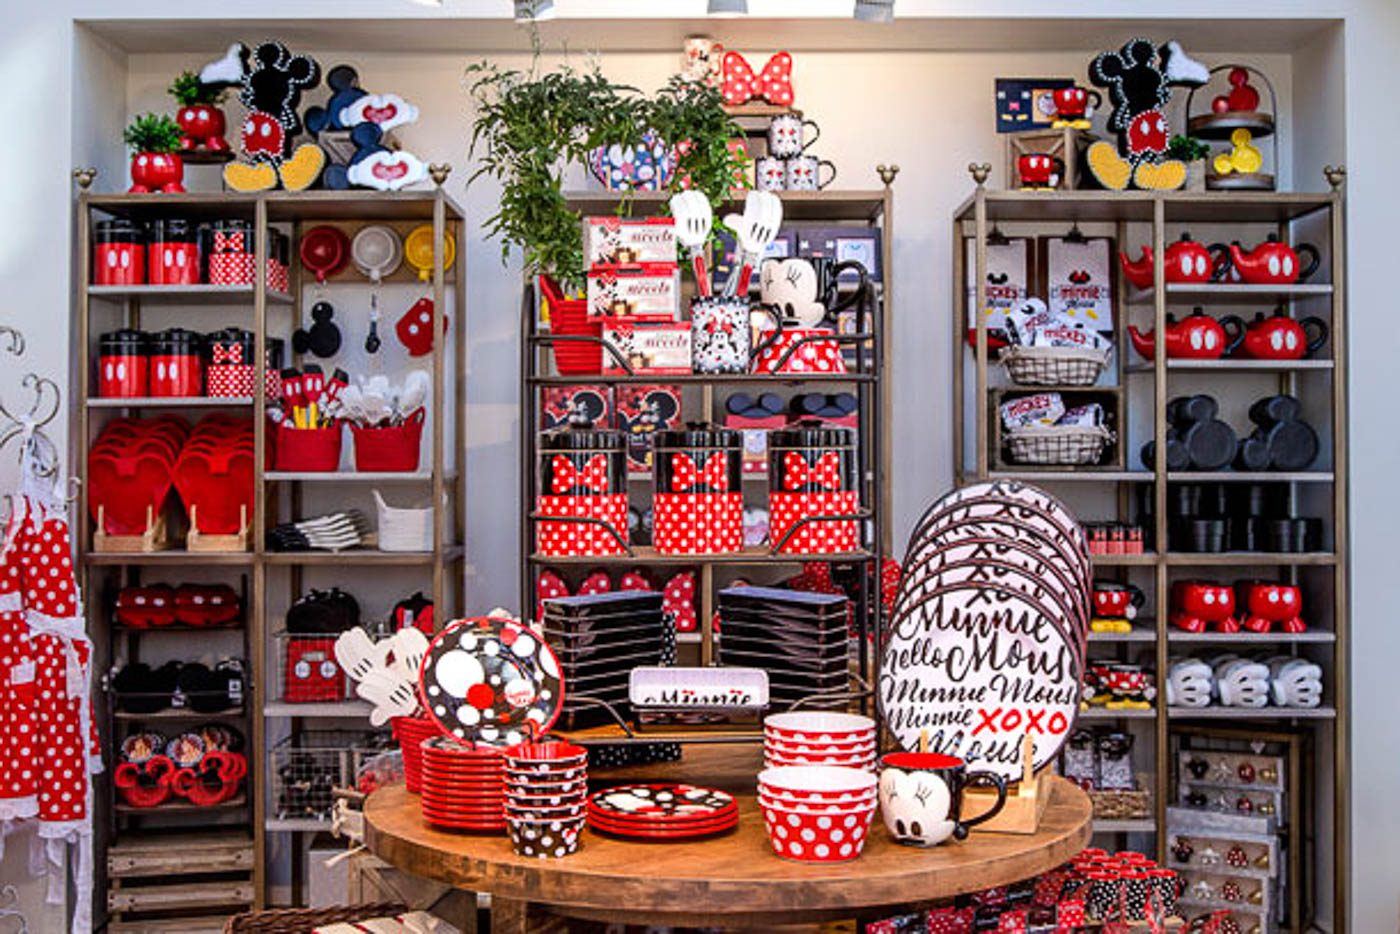 Turn your abode into the House of Mouse with pieces from Disney Home